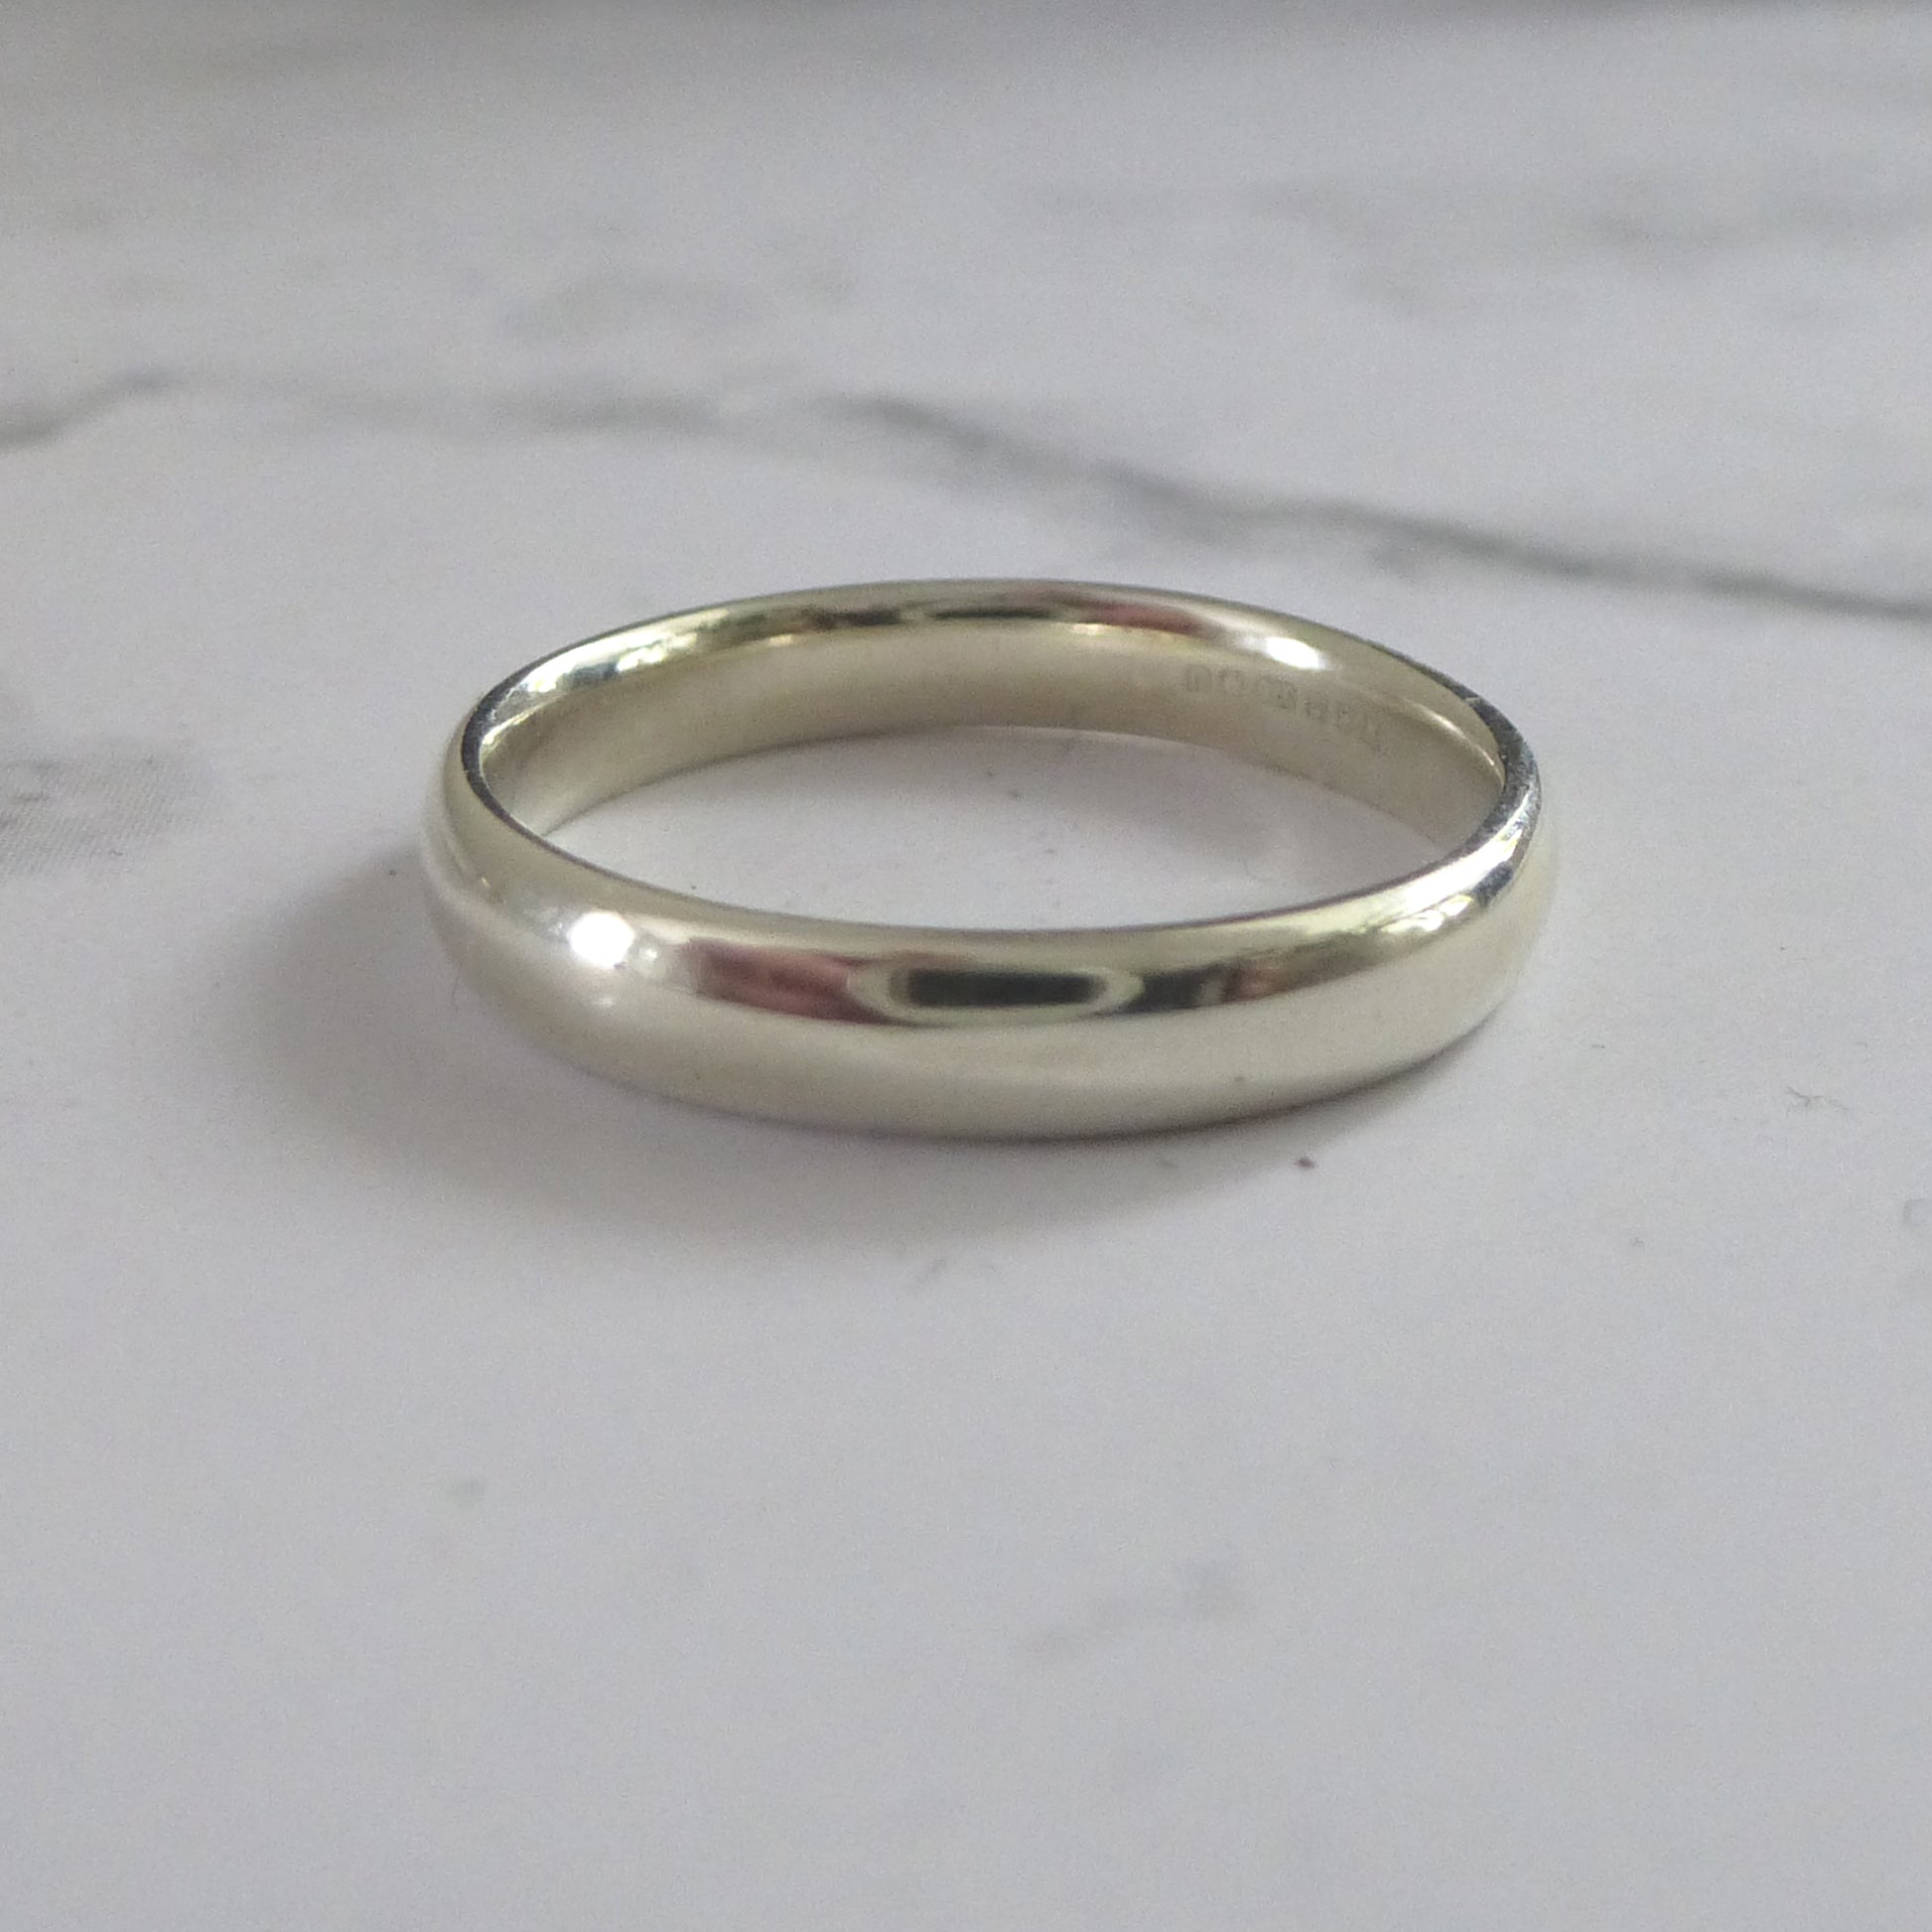 handmade wedding band in 9ct white gold, smooth finish, soft modern court shape, 100% recycled gold